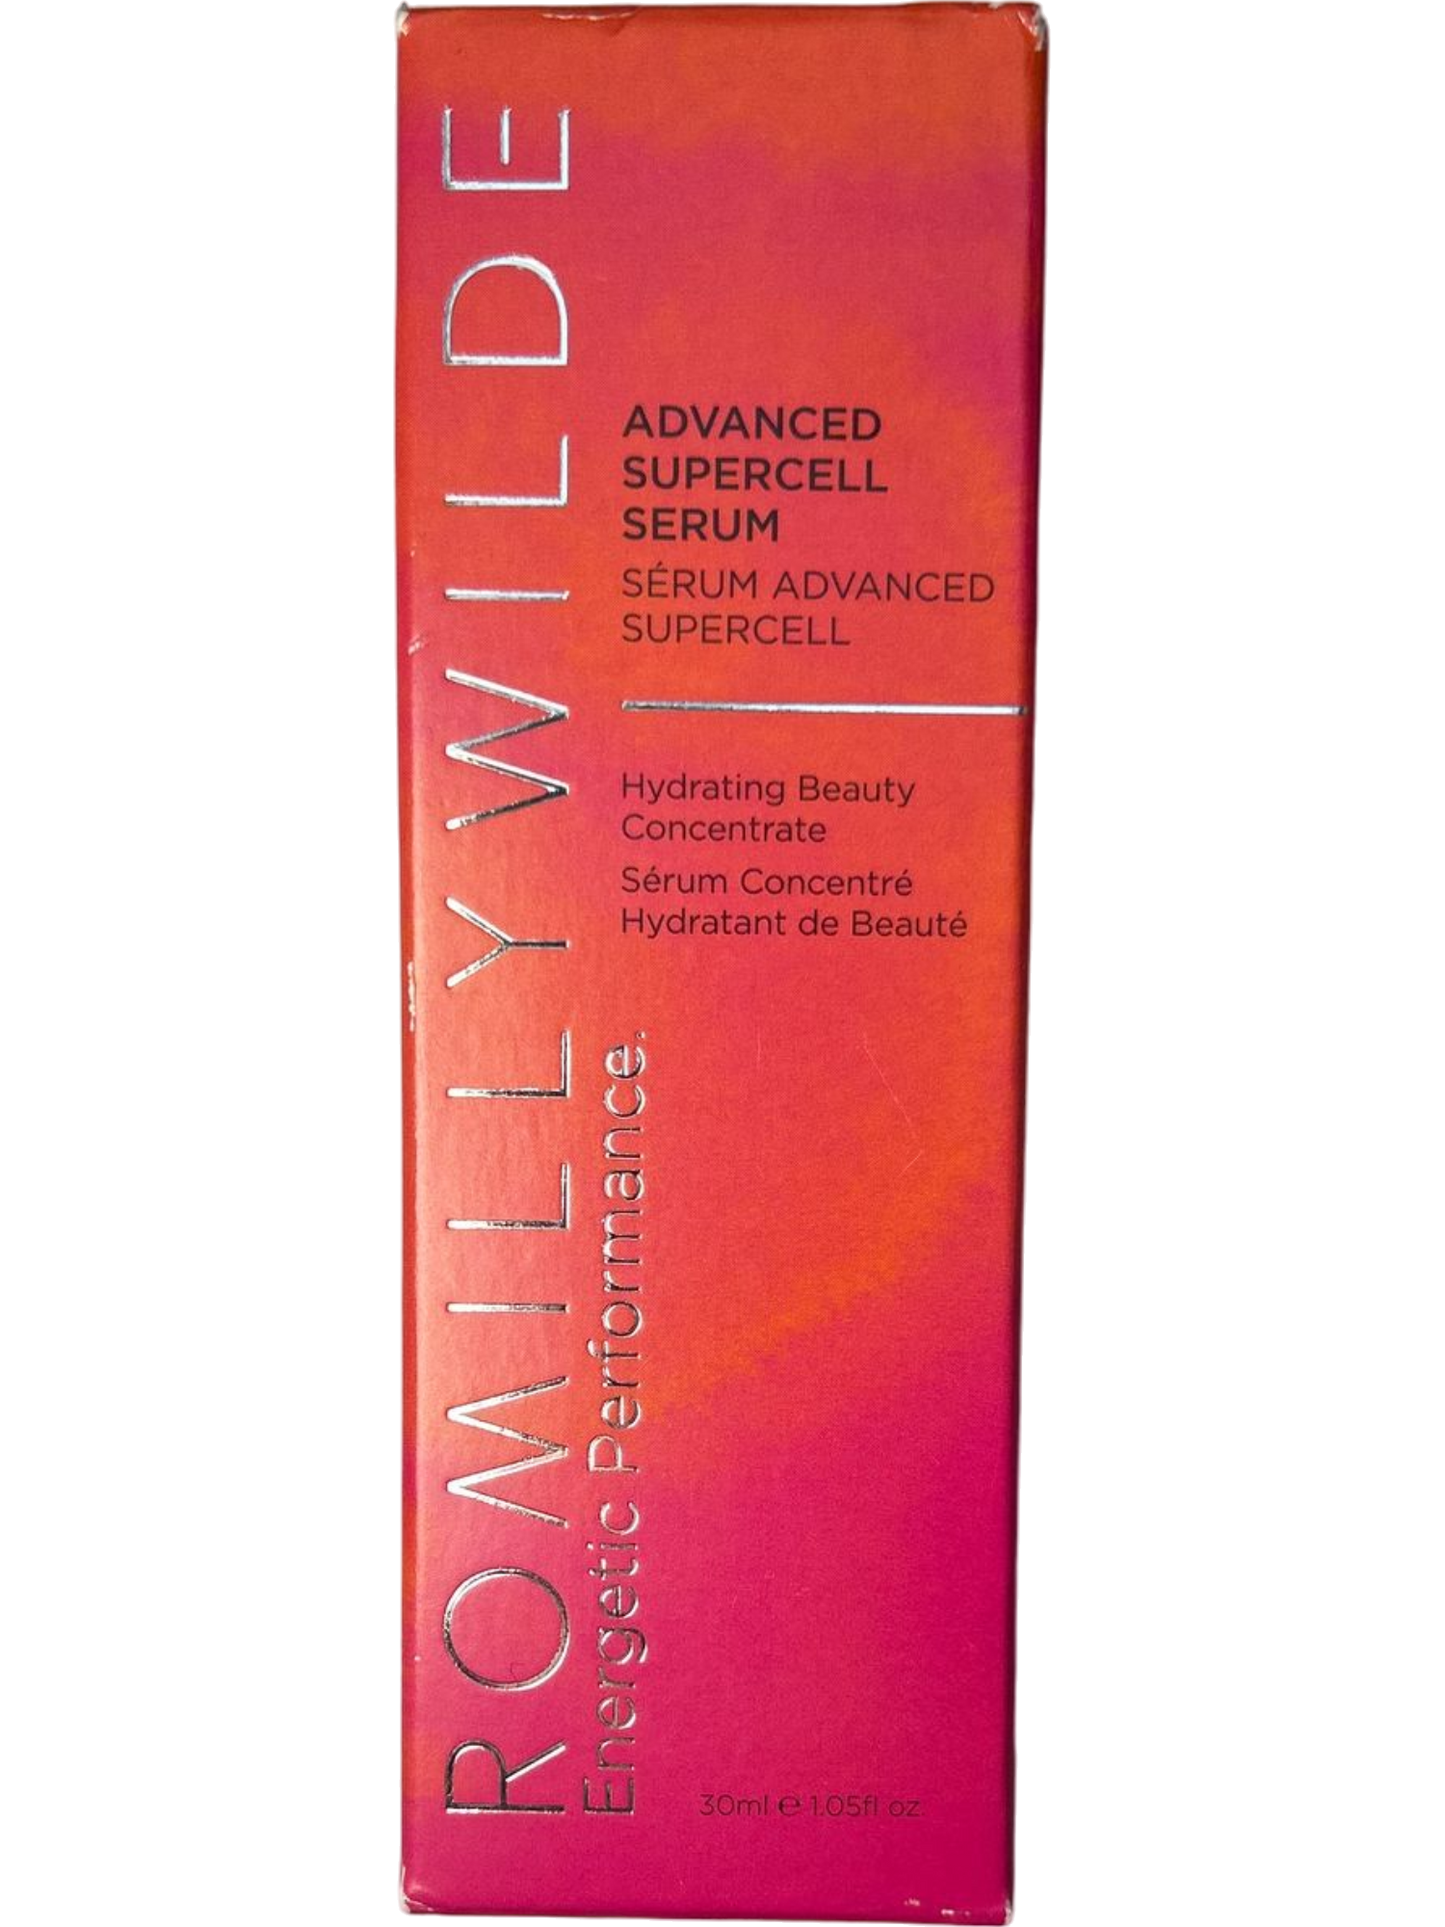 Romilly Wilde Advanced Supercell Serum Skin Care